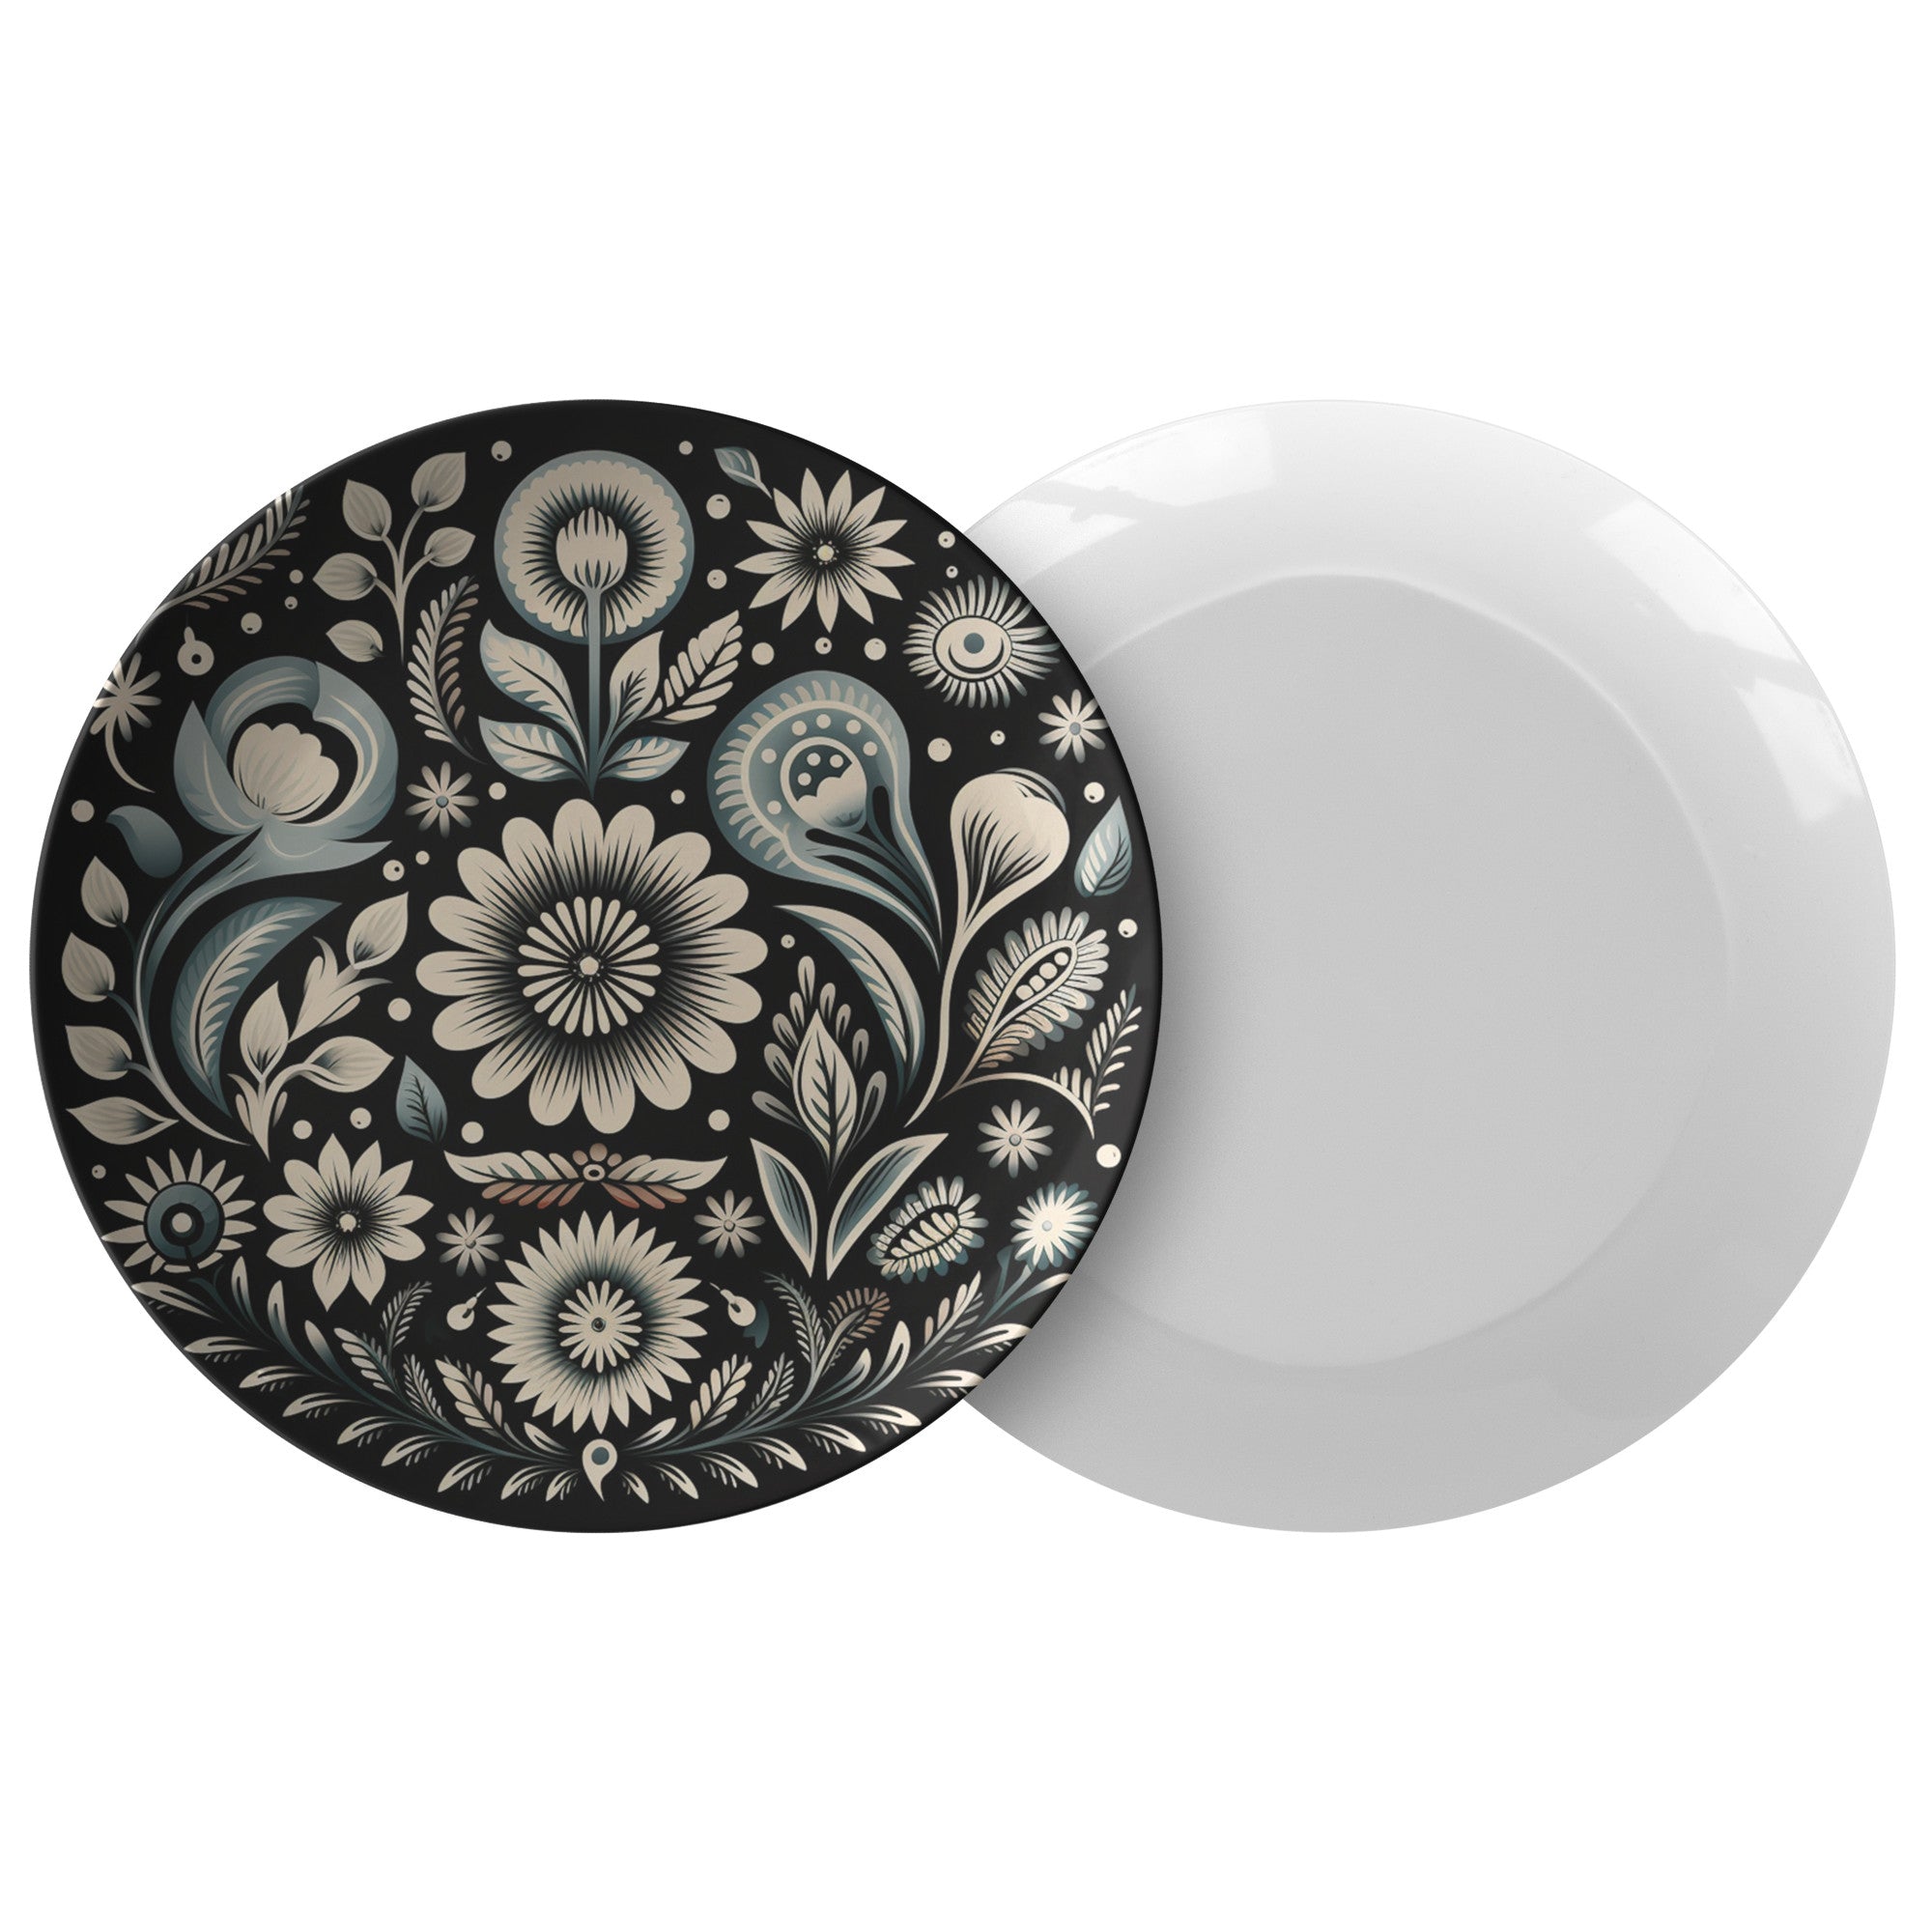 Black And White Floral Design Plate Kitchenware teelaunch Single  